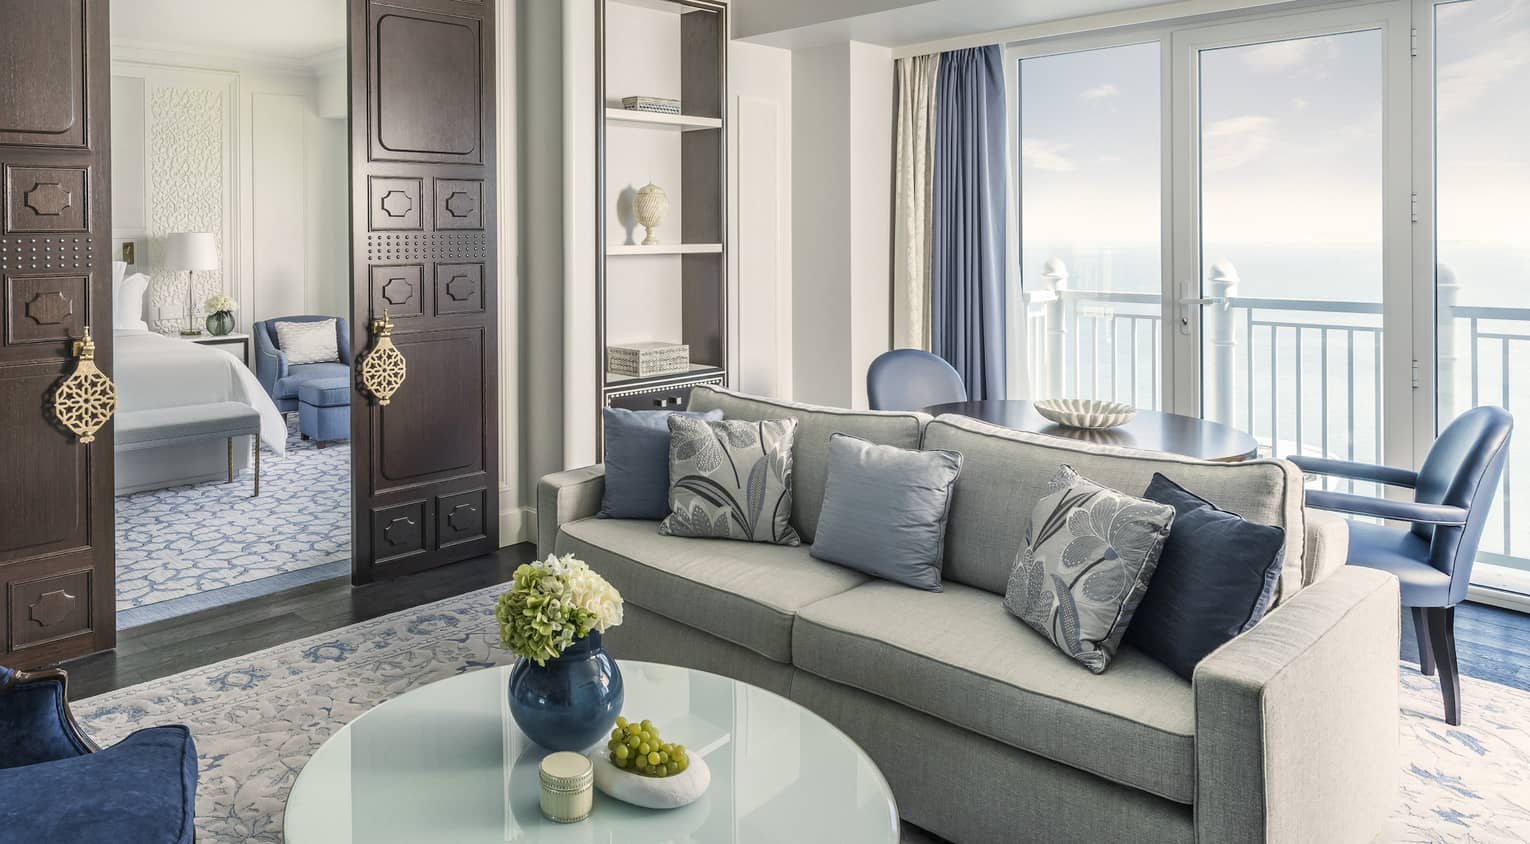 Sea-view living room, with grey sofa, blue pillows and accent chairs, chandelier, dark wooden doors open to bedroom